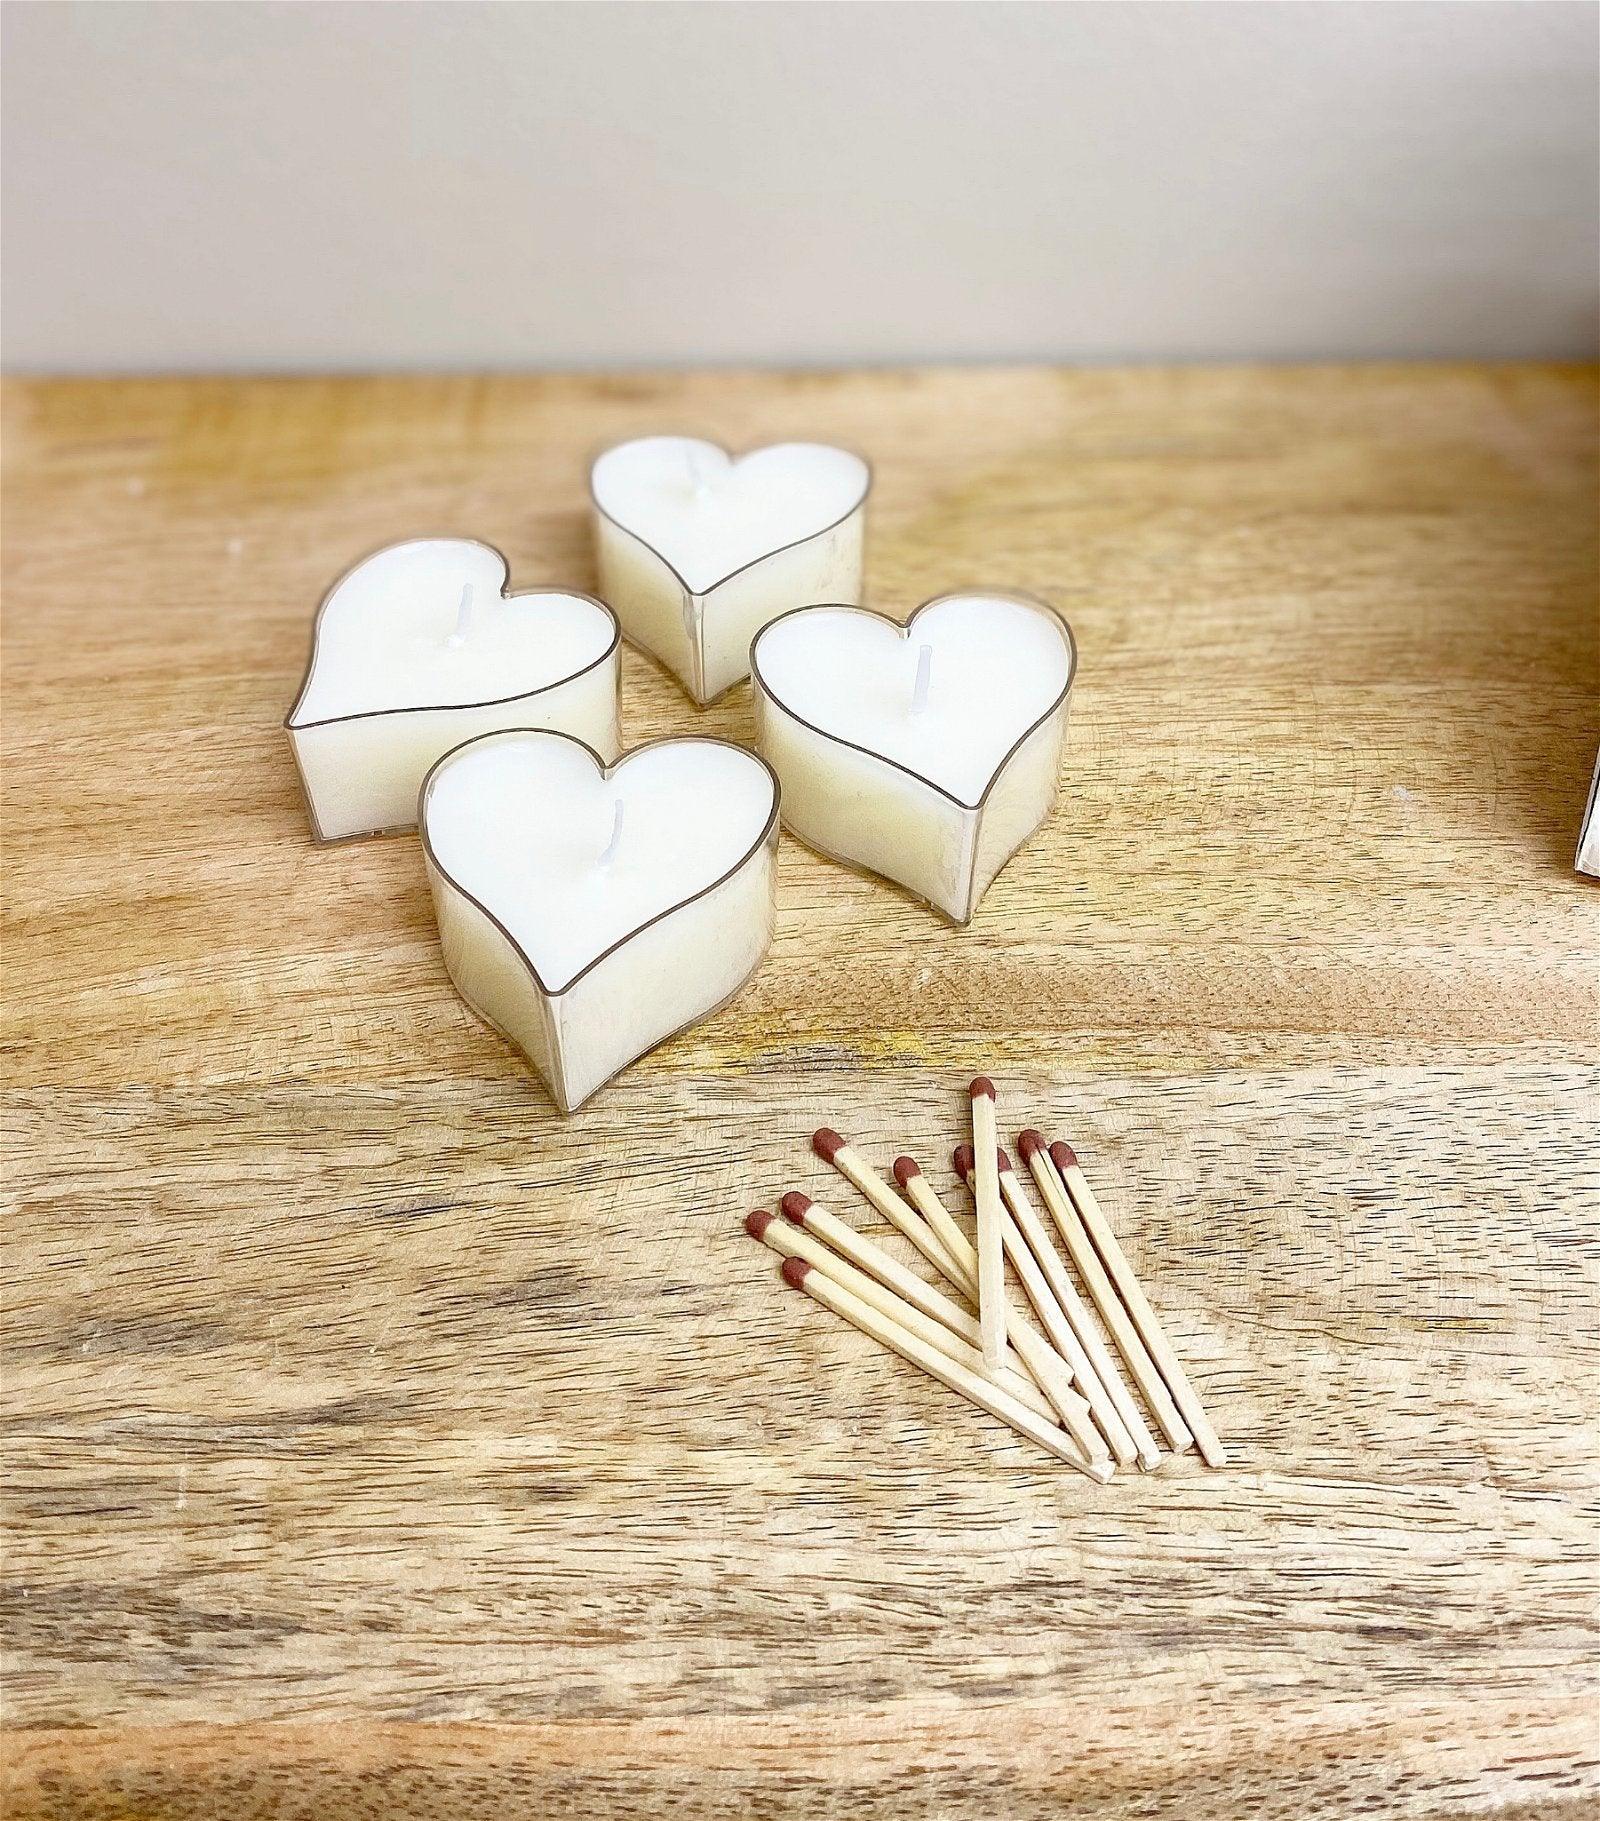 Draw a HEART with tea light candles!